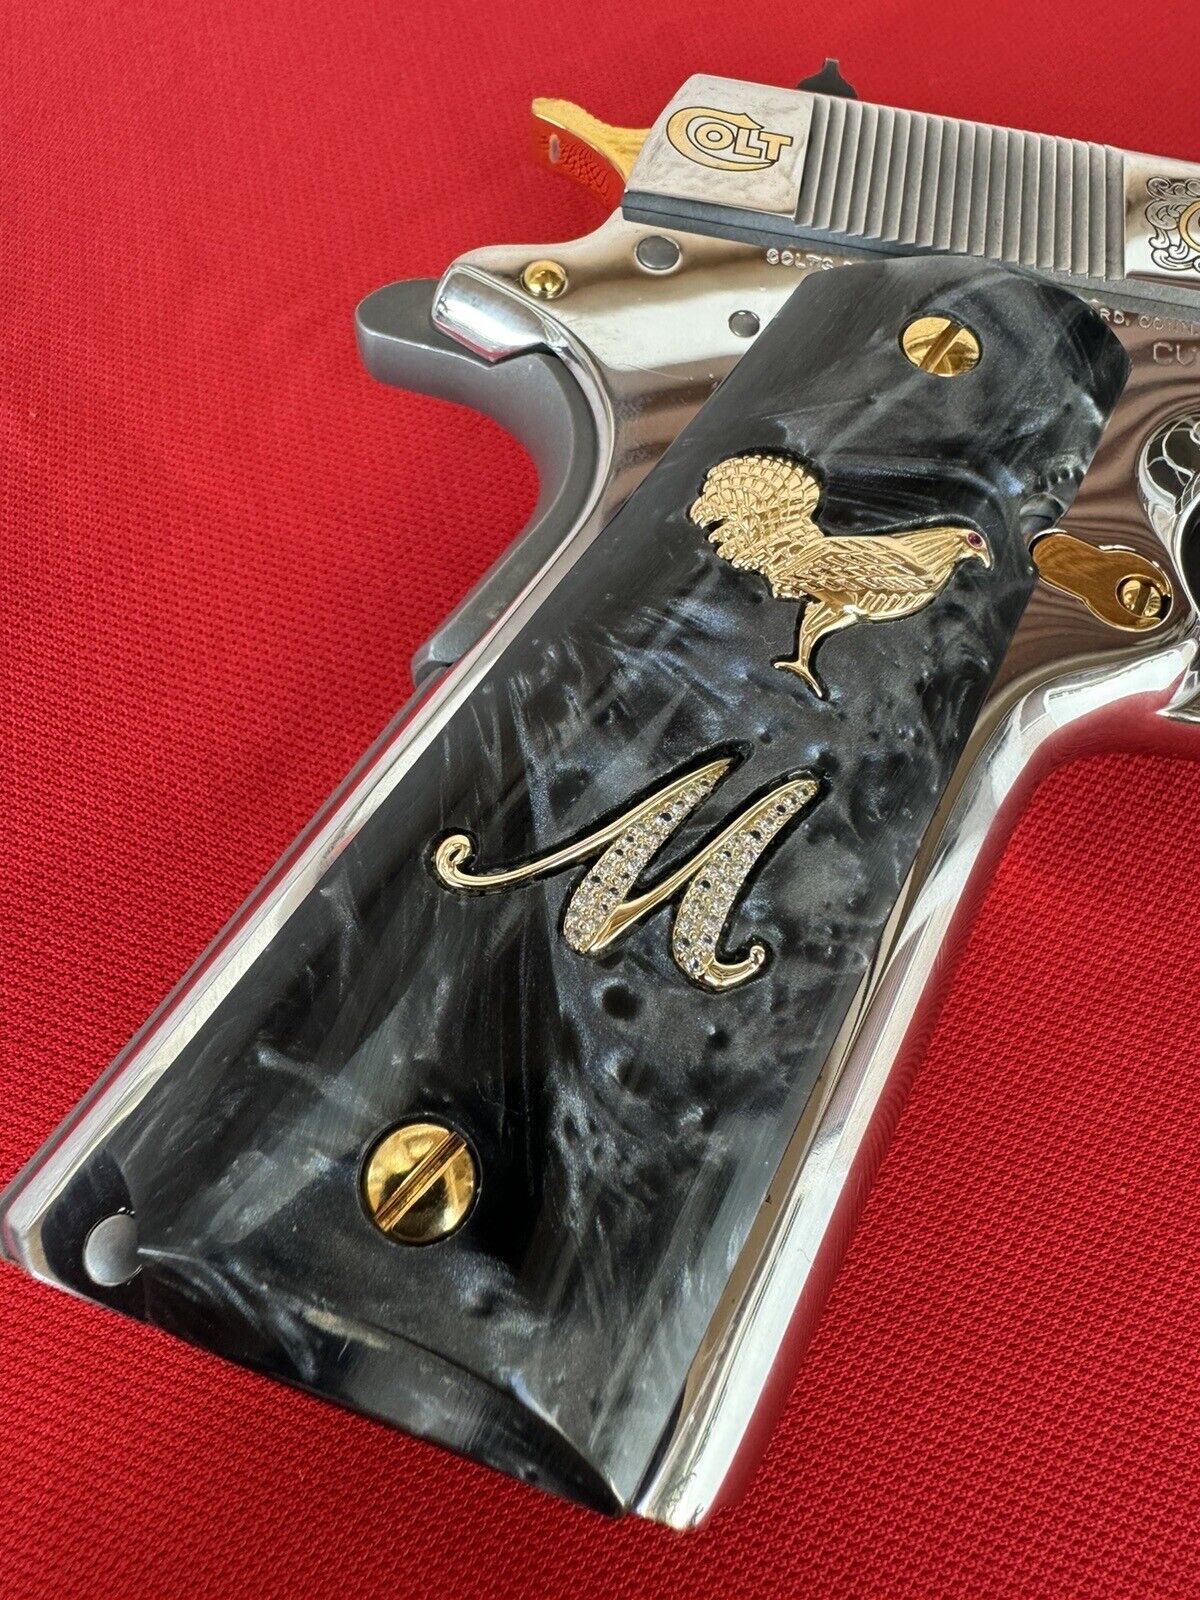 1911 "Rooster" “M” 24k Gold Plated Inlayed CZ stones Grips  Black Pearl Grips